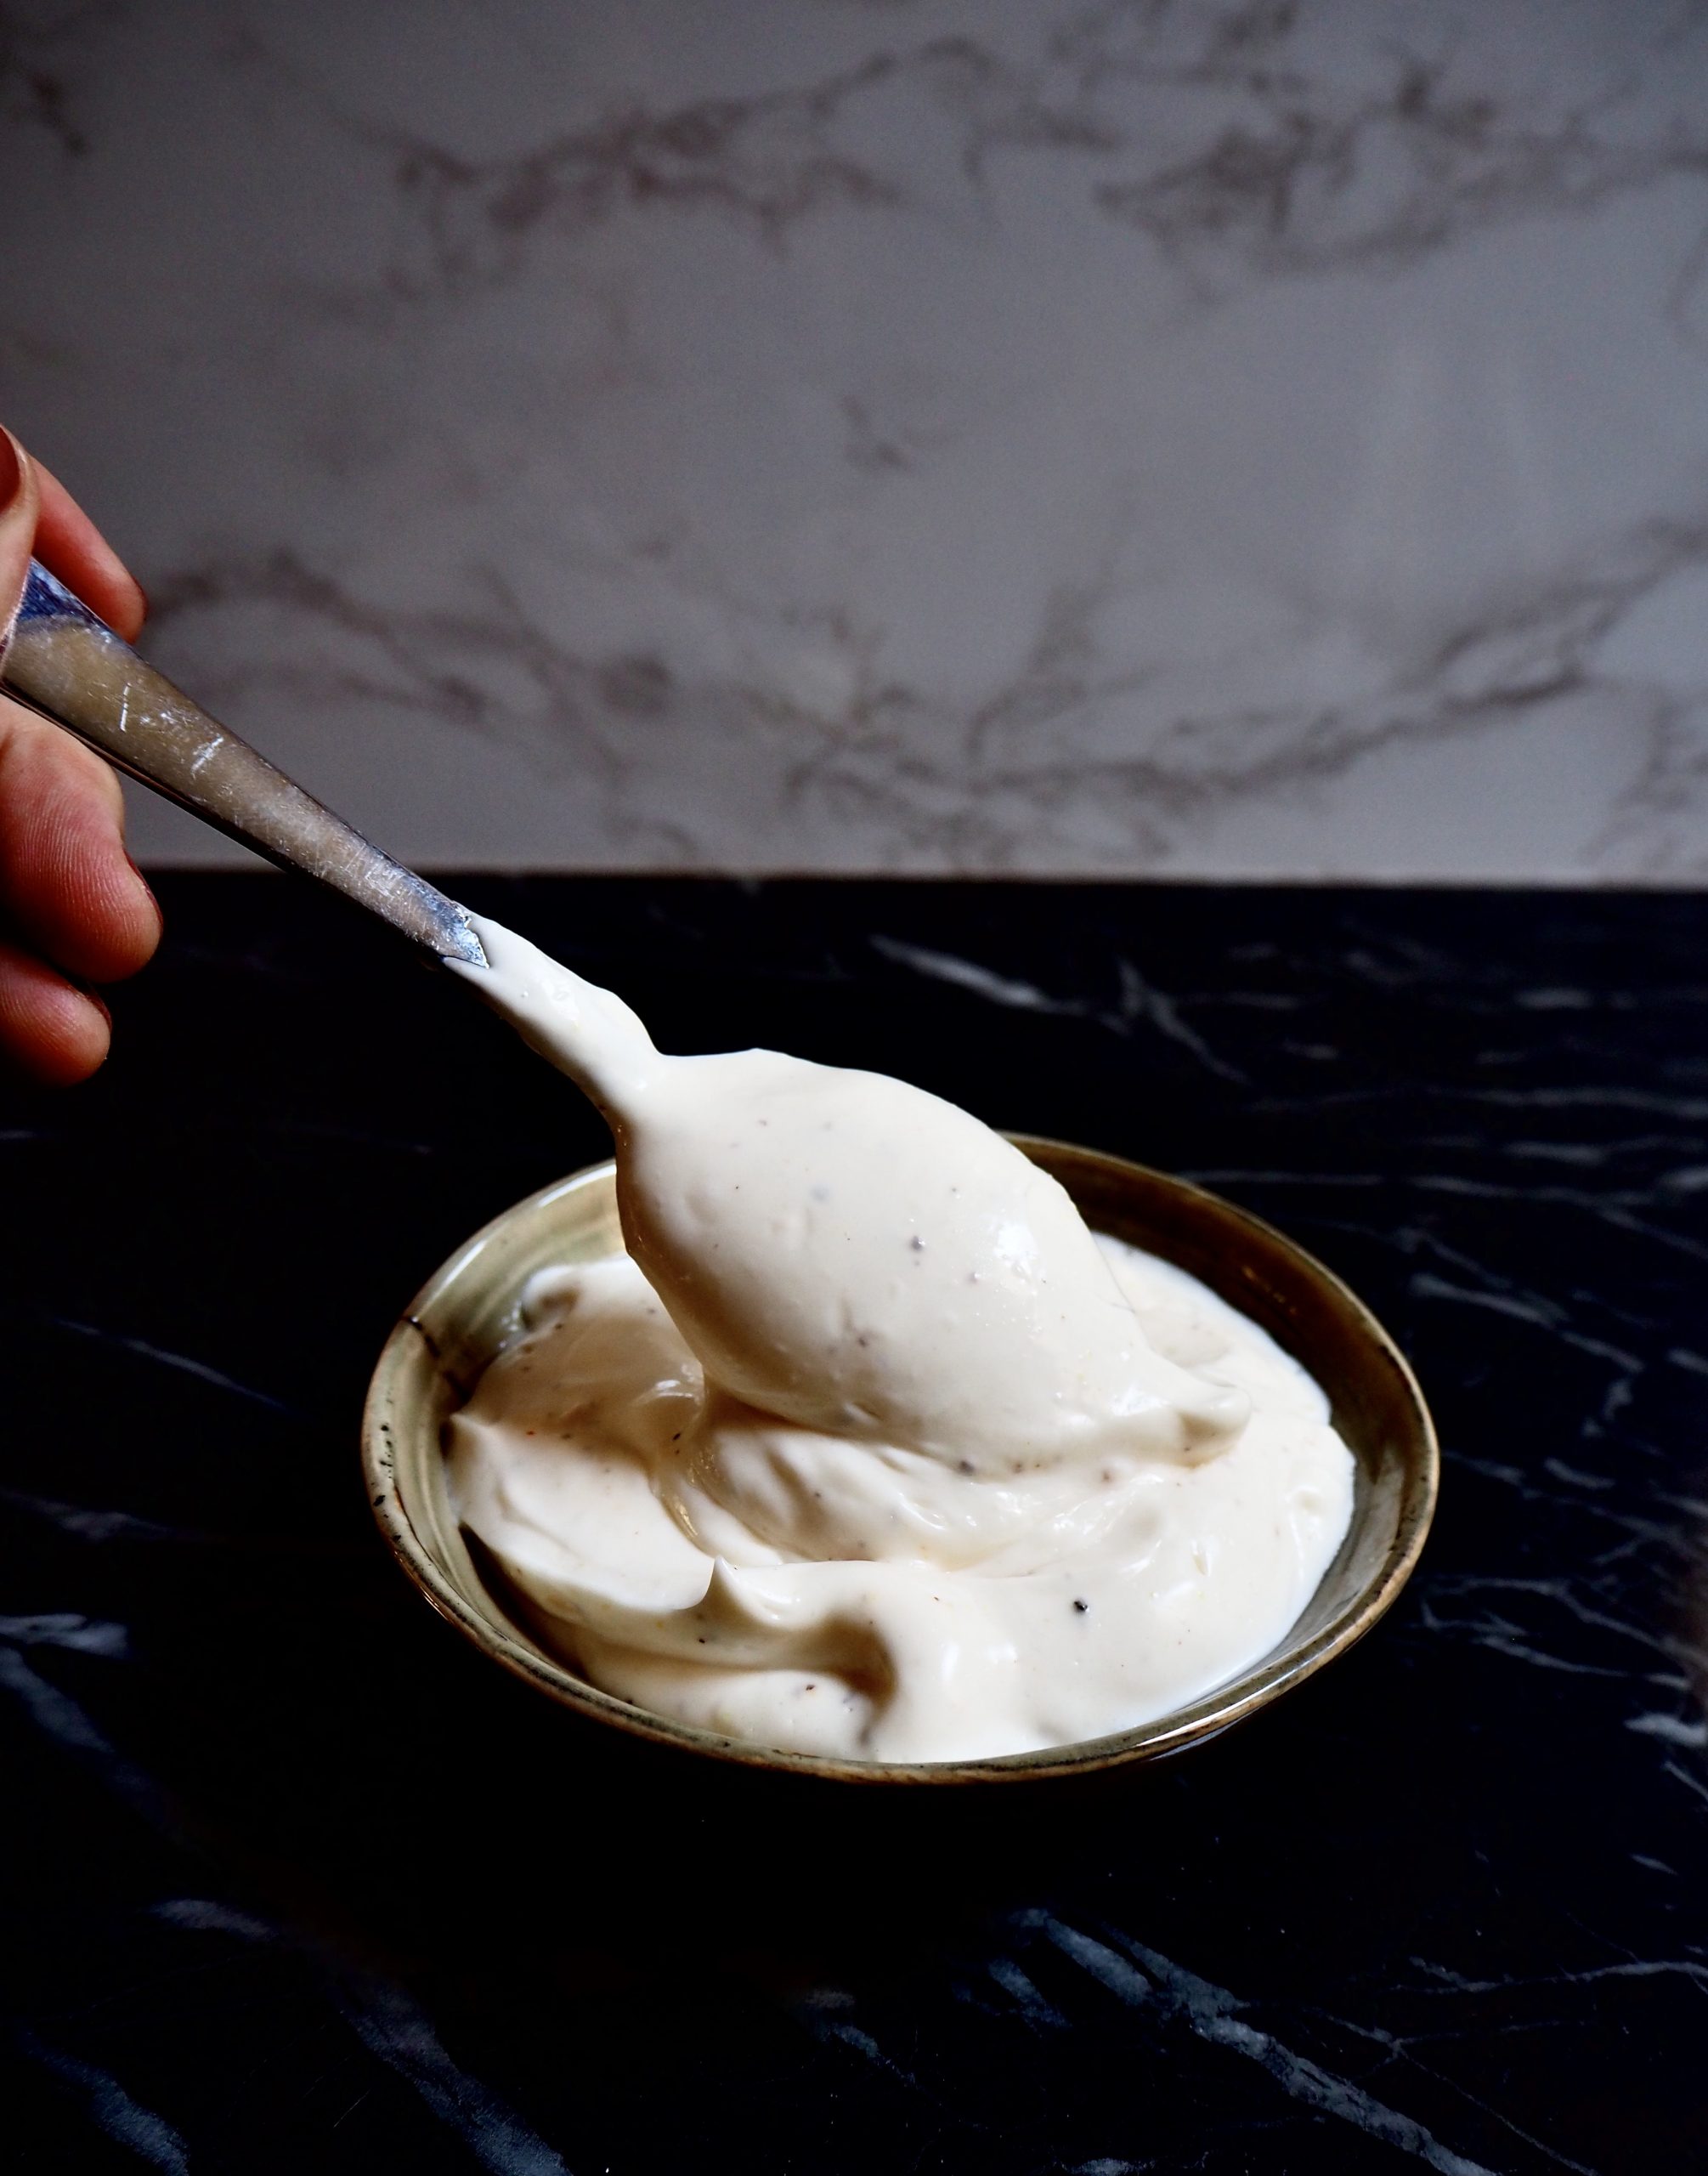 easy vegan aioli seen from front view in a small bowl with a silver spoon and a hand against a dark and light backdrop